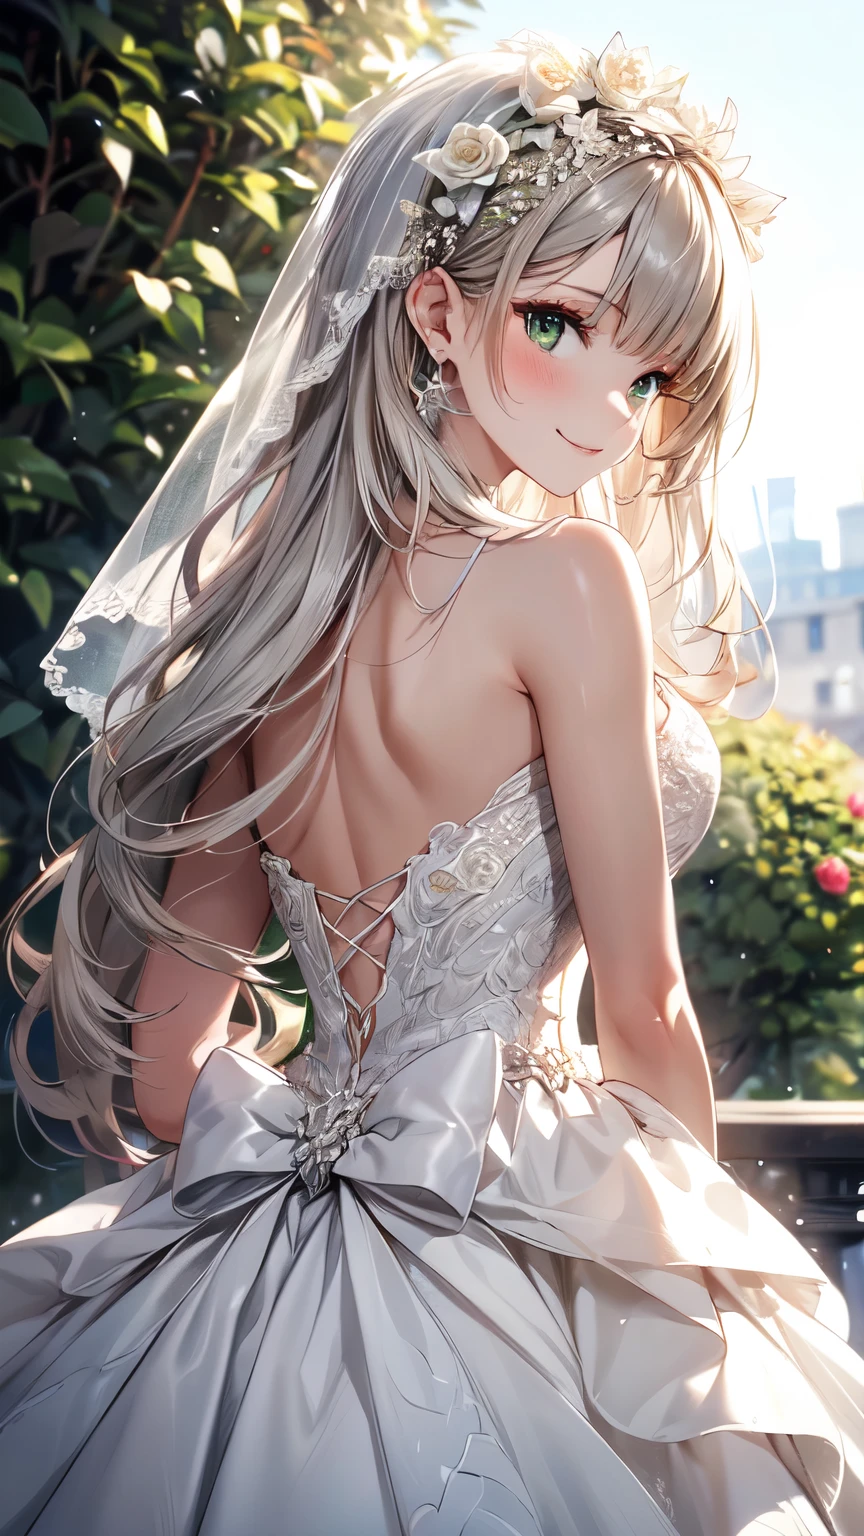 (masterpiece, highest quality, beautifully、aesthetic:1.3), Upper Body, Looking Back, View Viewer, One girl, alone, A light smile, (compensate, Long Hair, Light grey hair, Green Eyes:1.2), Ruani 0256, Bridal Veil, lace trim dress, See through, Wedding dress, Outdoor, White Rose, garden, morning, Are standing, Very detailed, 